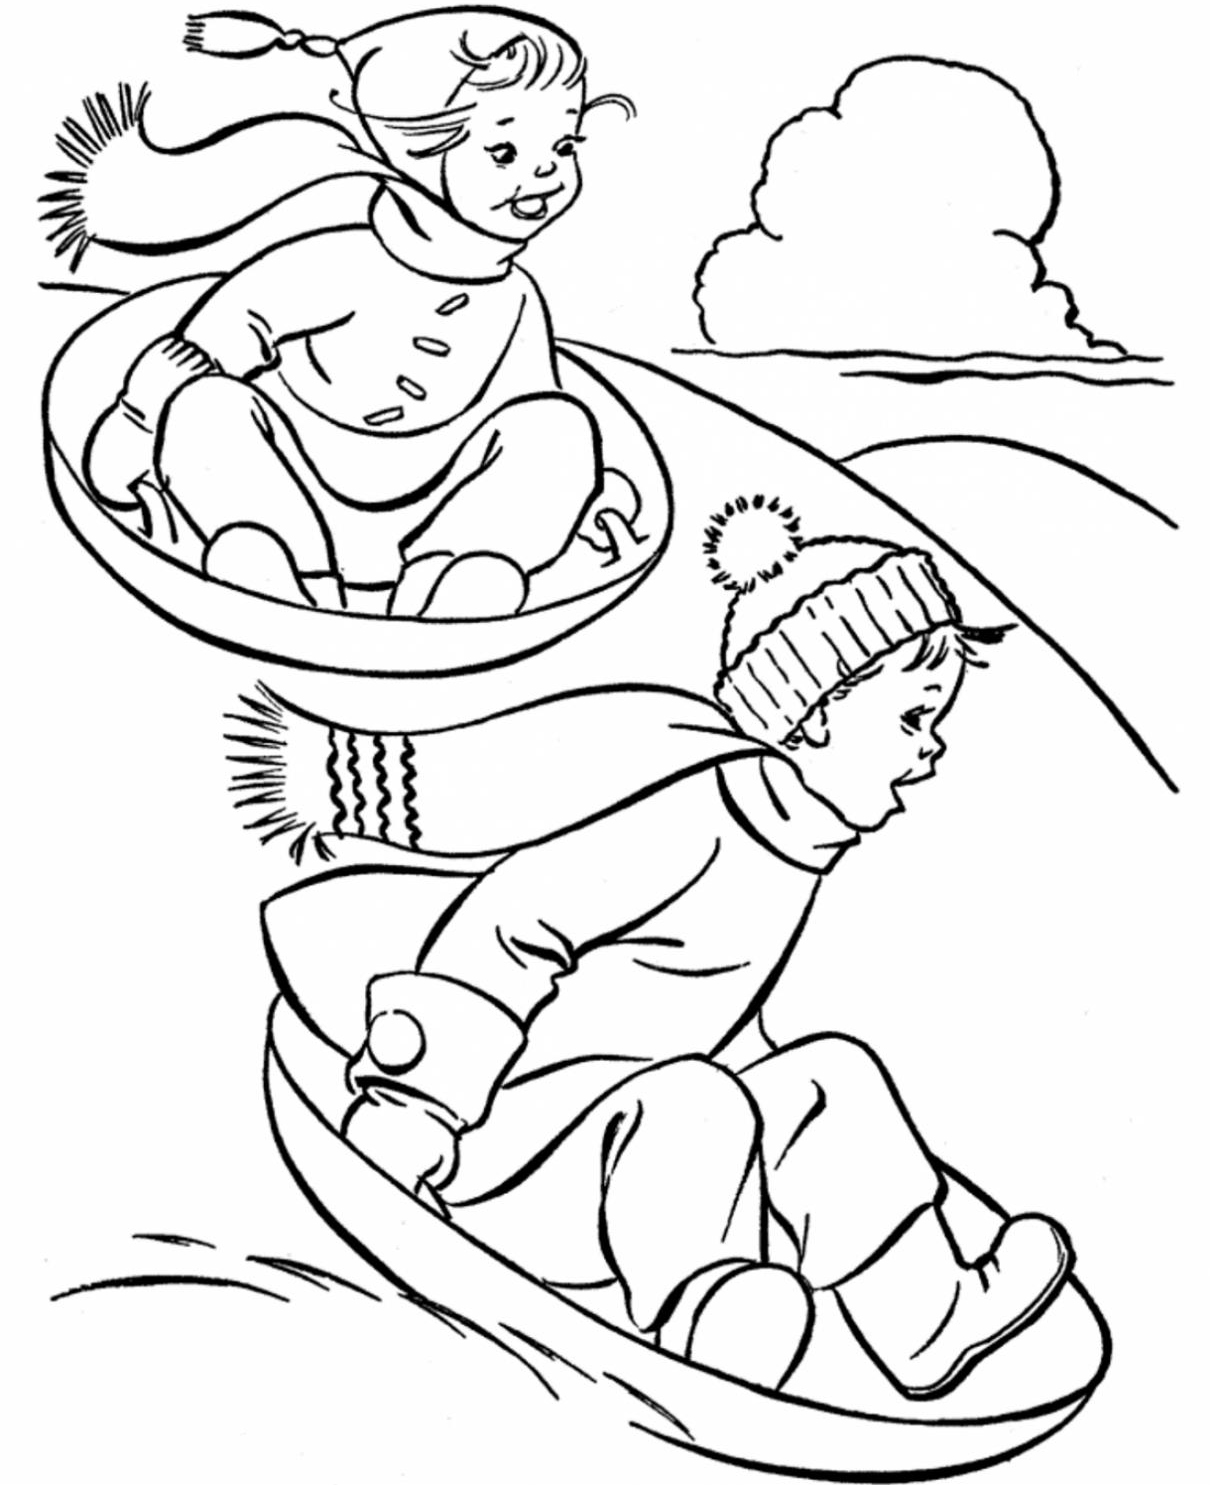 13-free-printable-winter-scene-coloring-pages